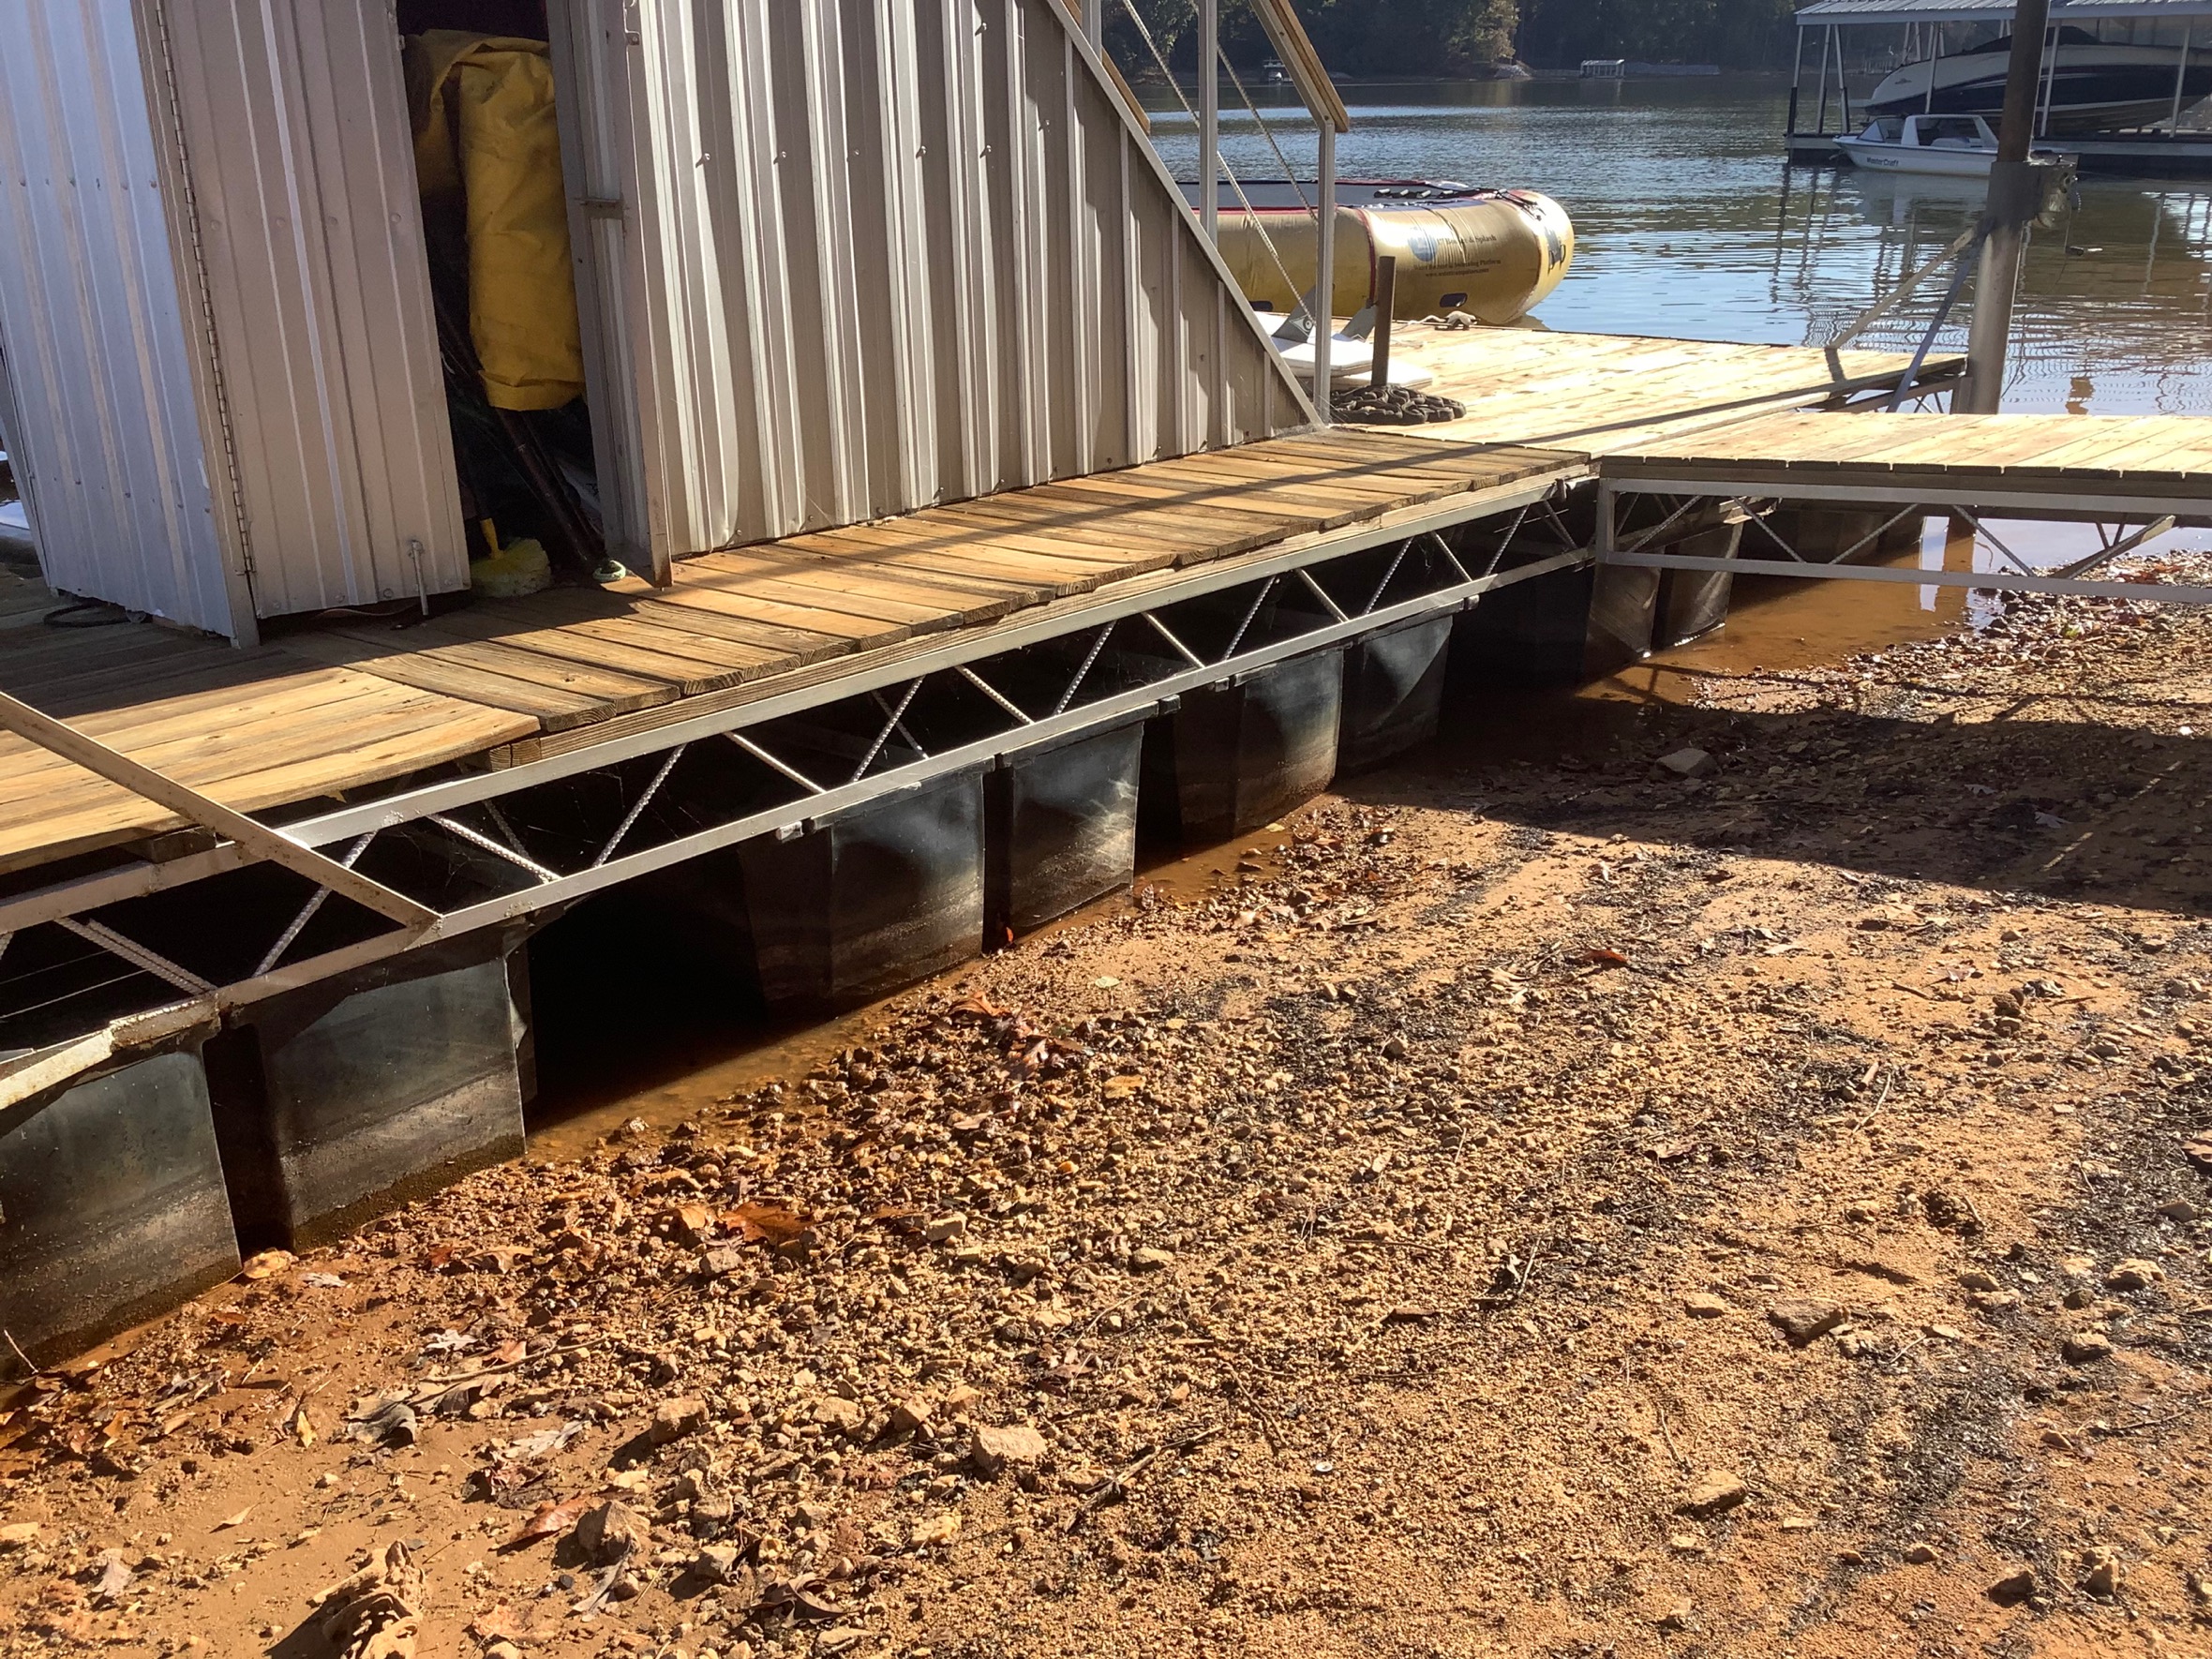 5 Reasons to Move Your Boat Dock in the Off Season